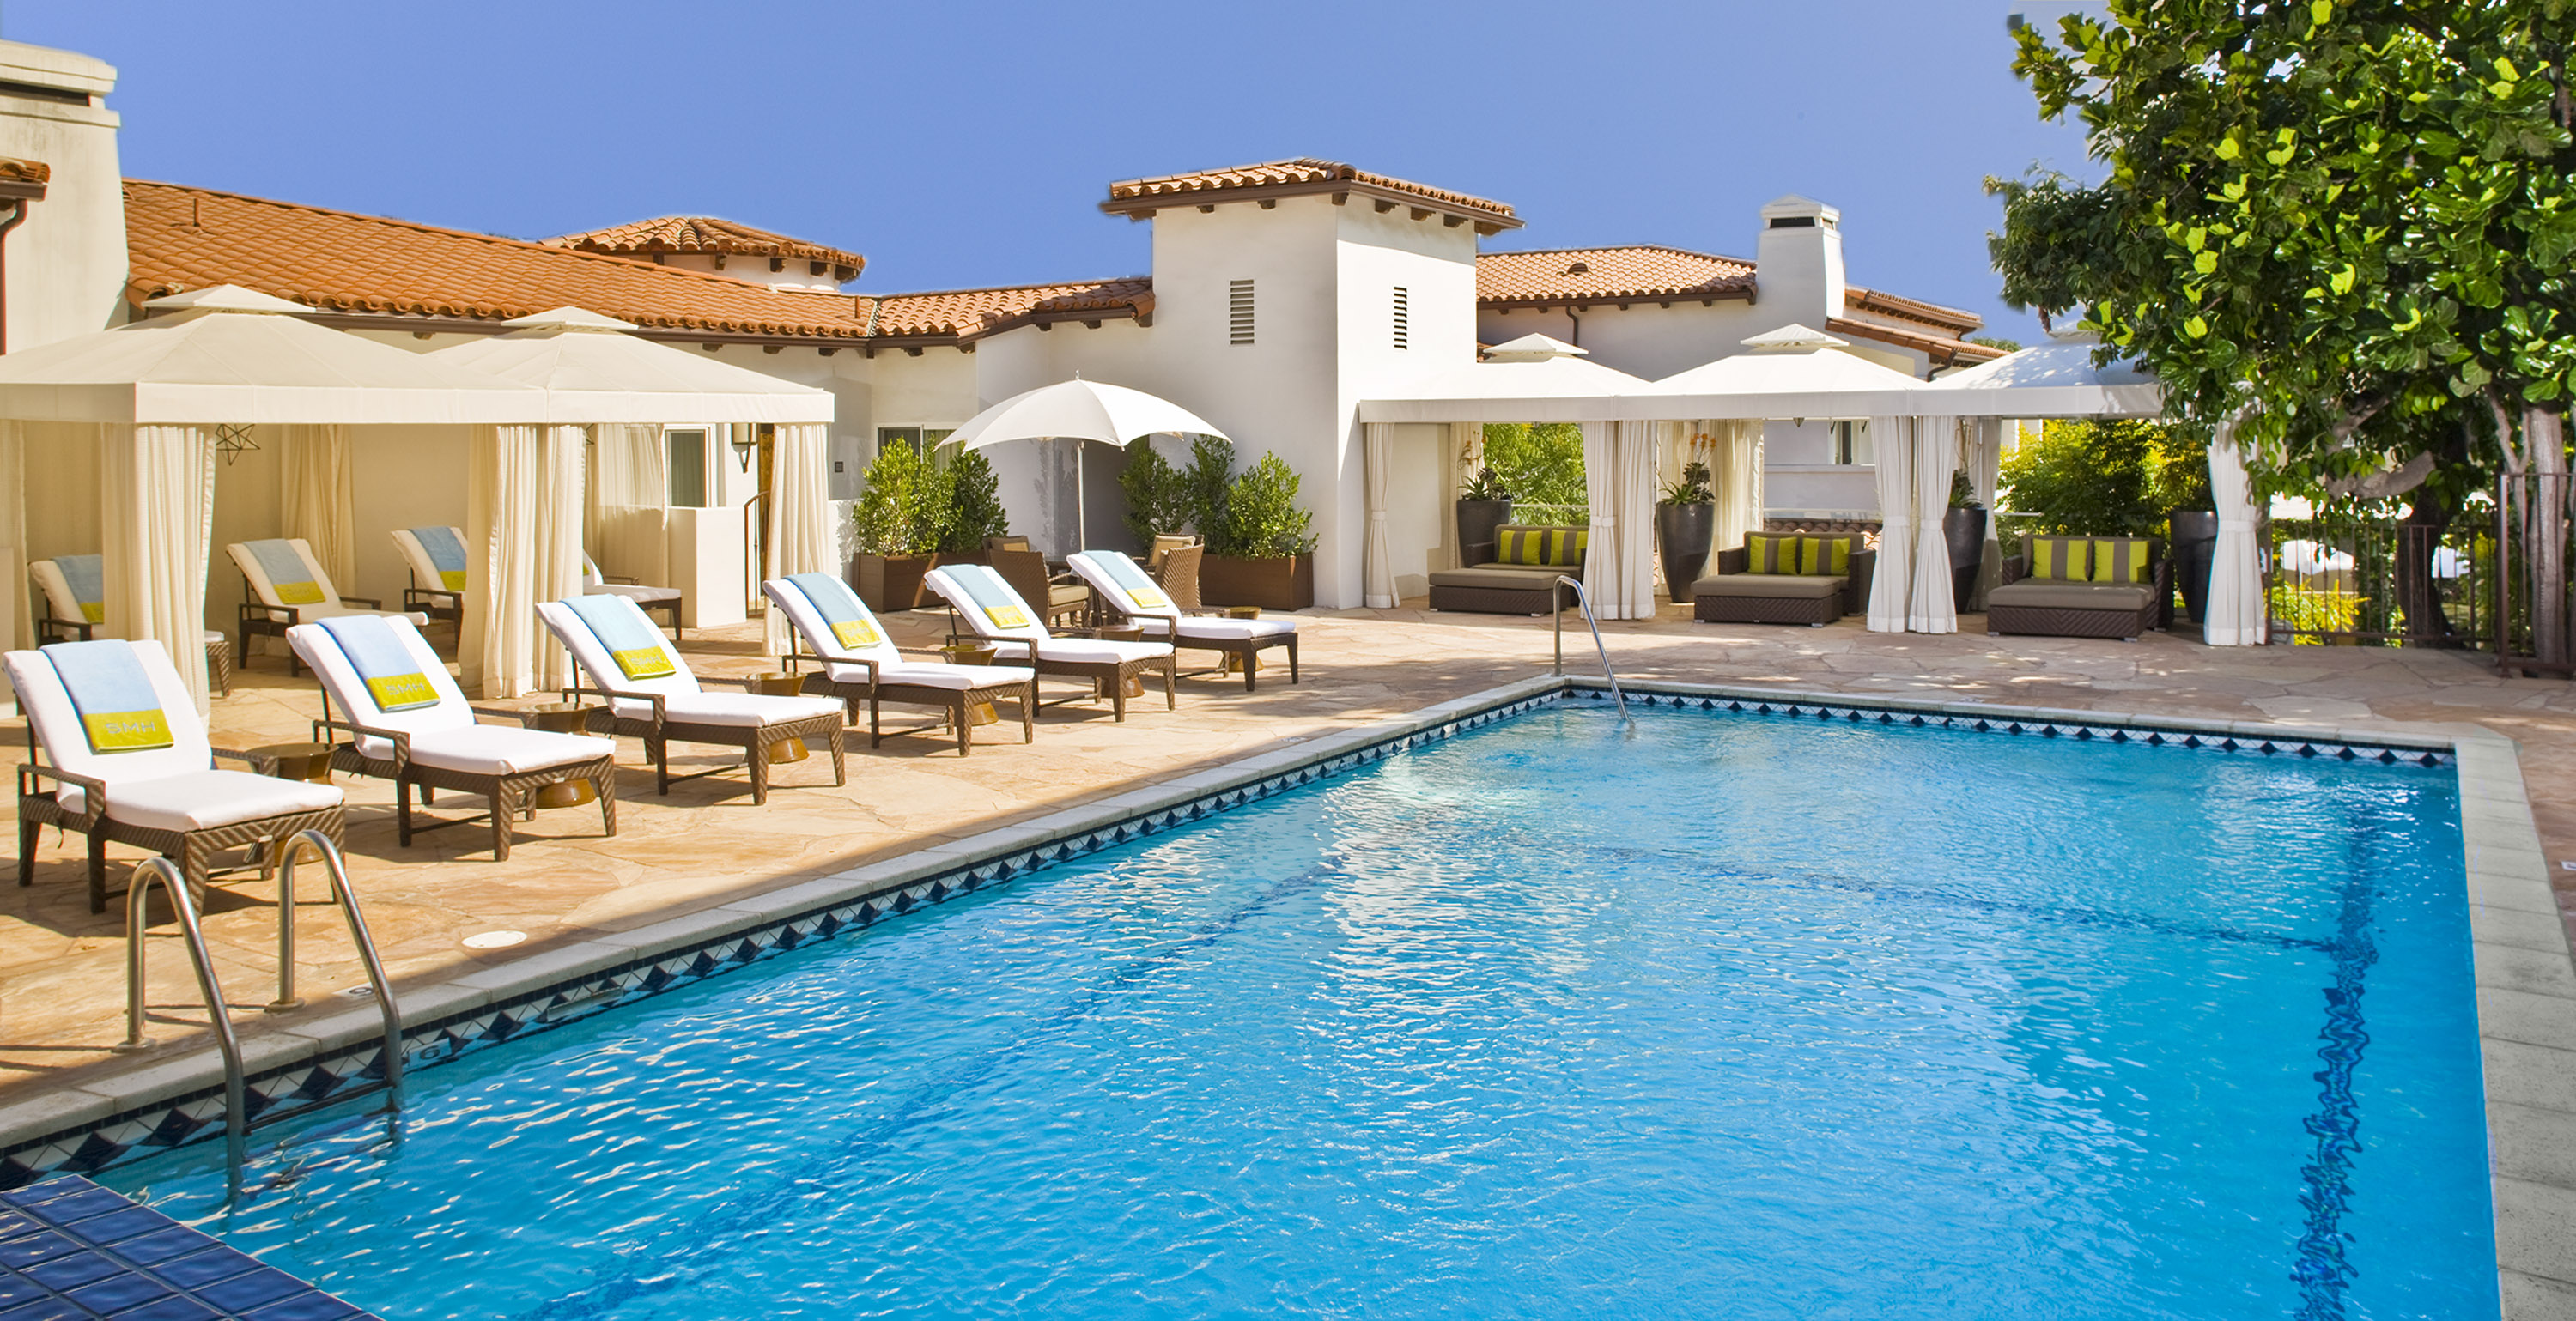 Outdoor pool at the Spanish Villa-style Sunset Marquis with white-cushion lounge chairs.